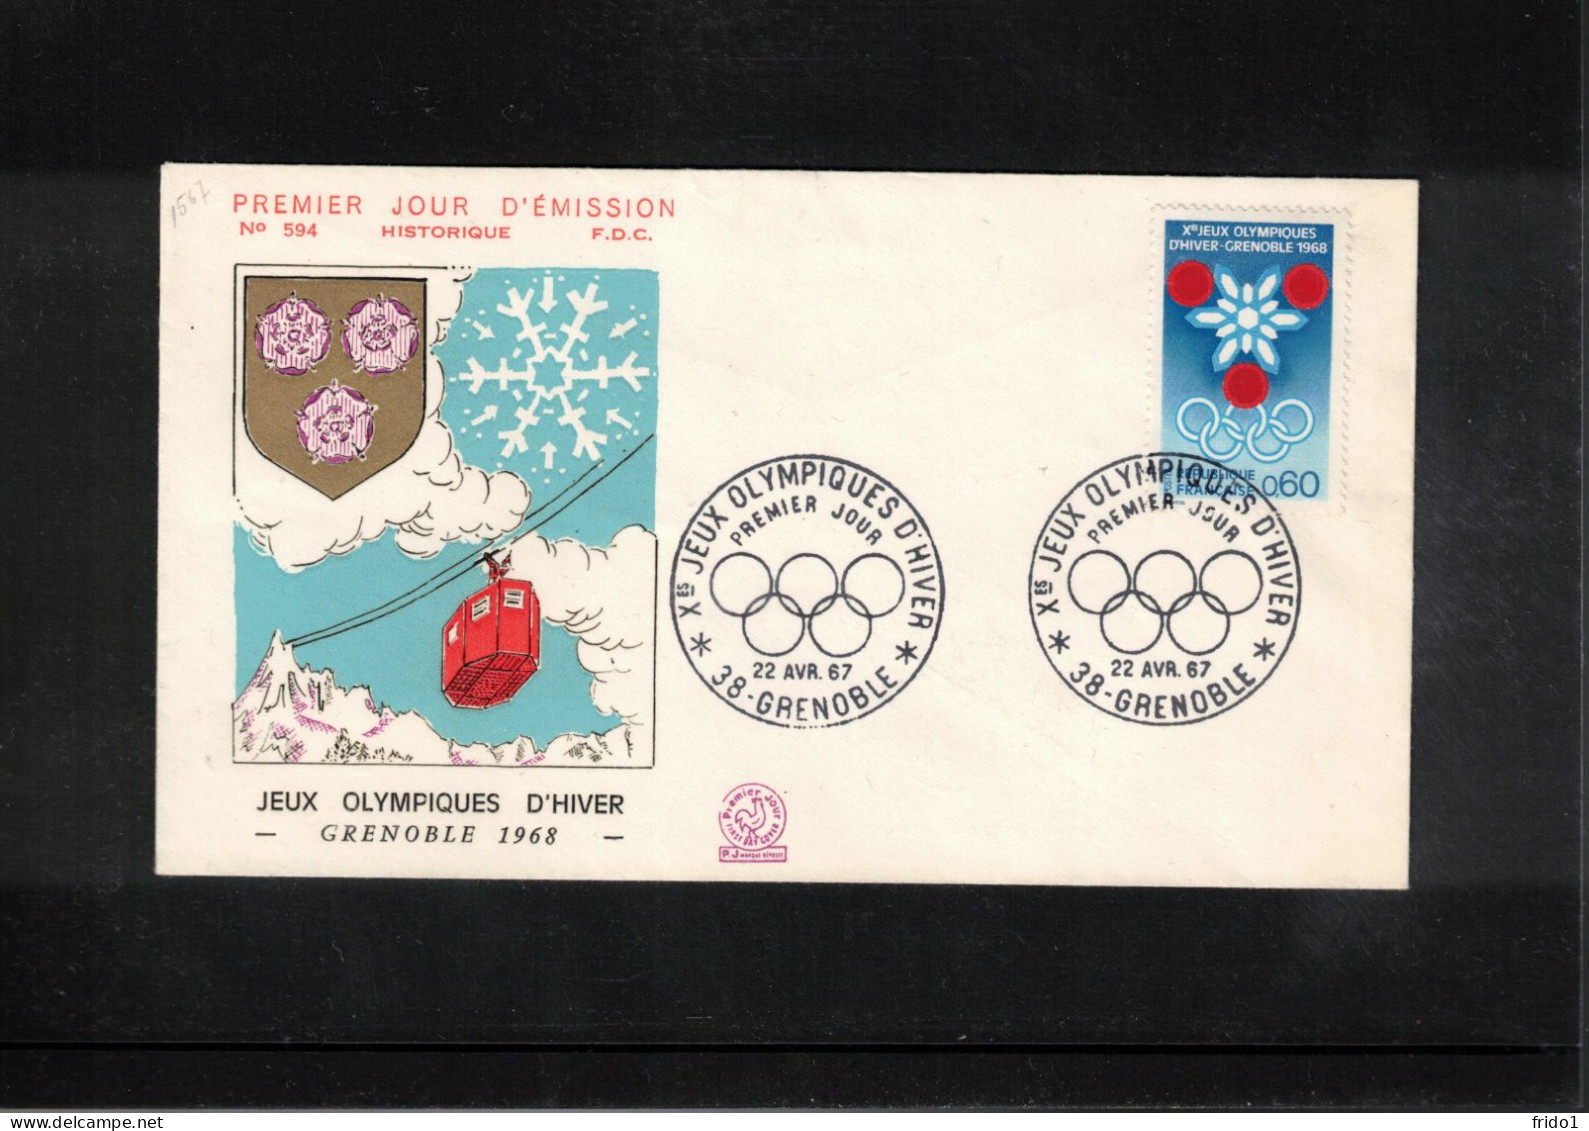 France 1967 Olympic Games Grenoble FDC - Winter 1968: Grenoble